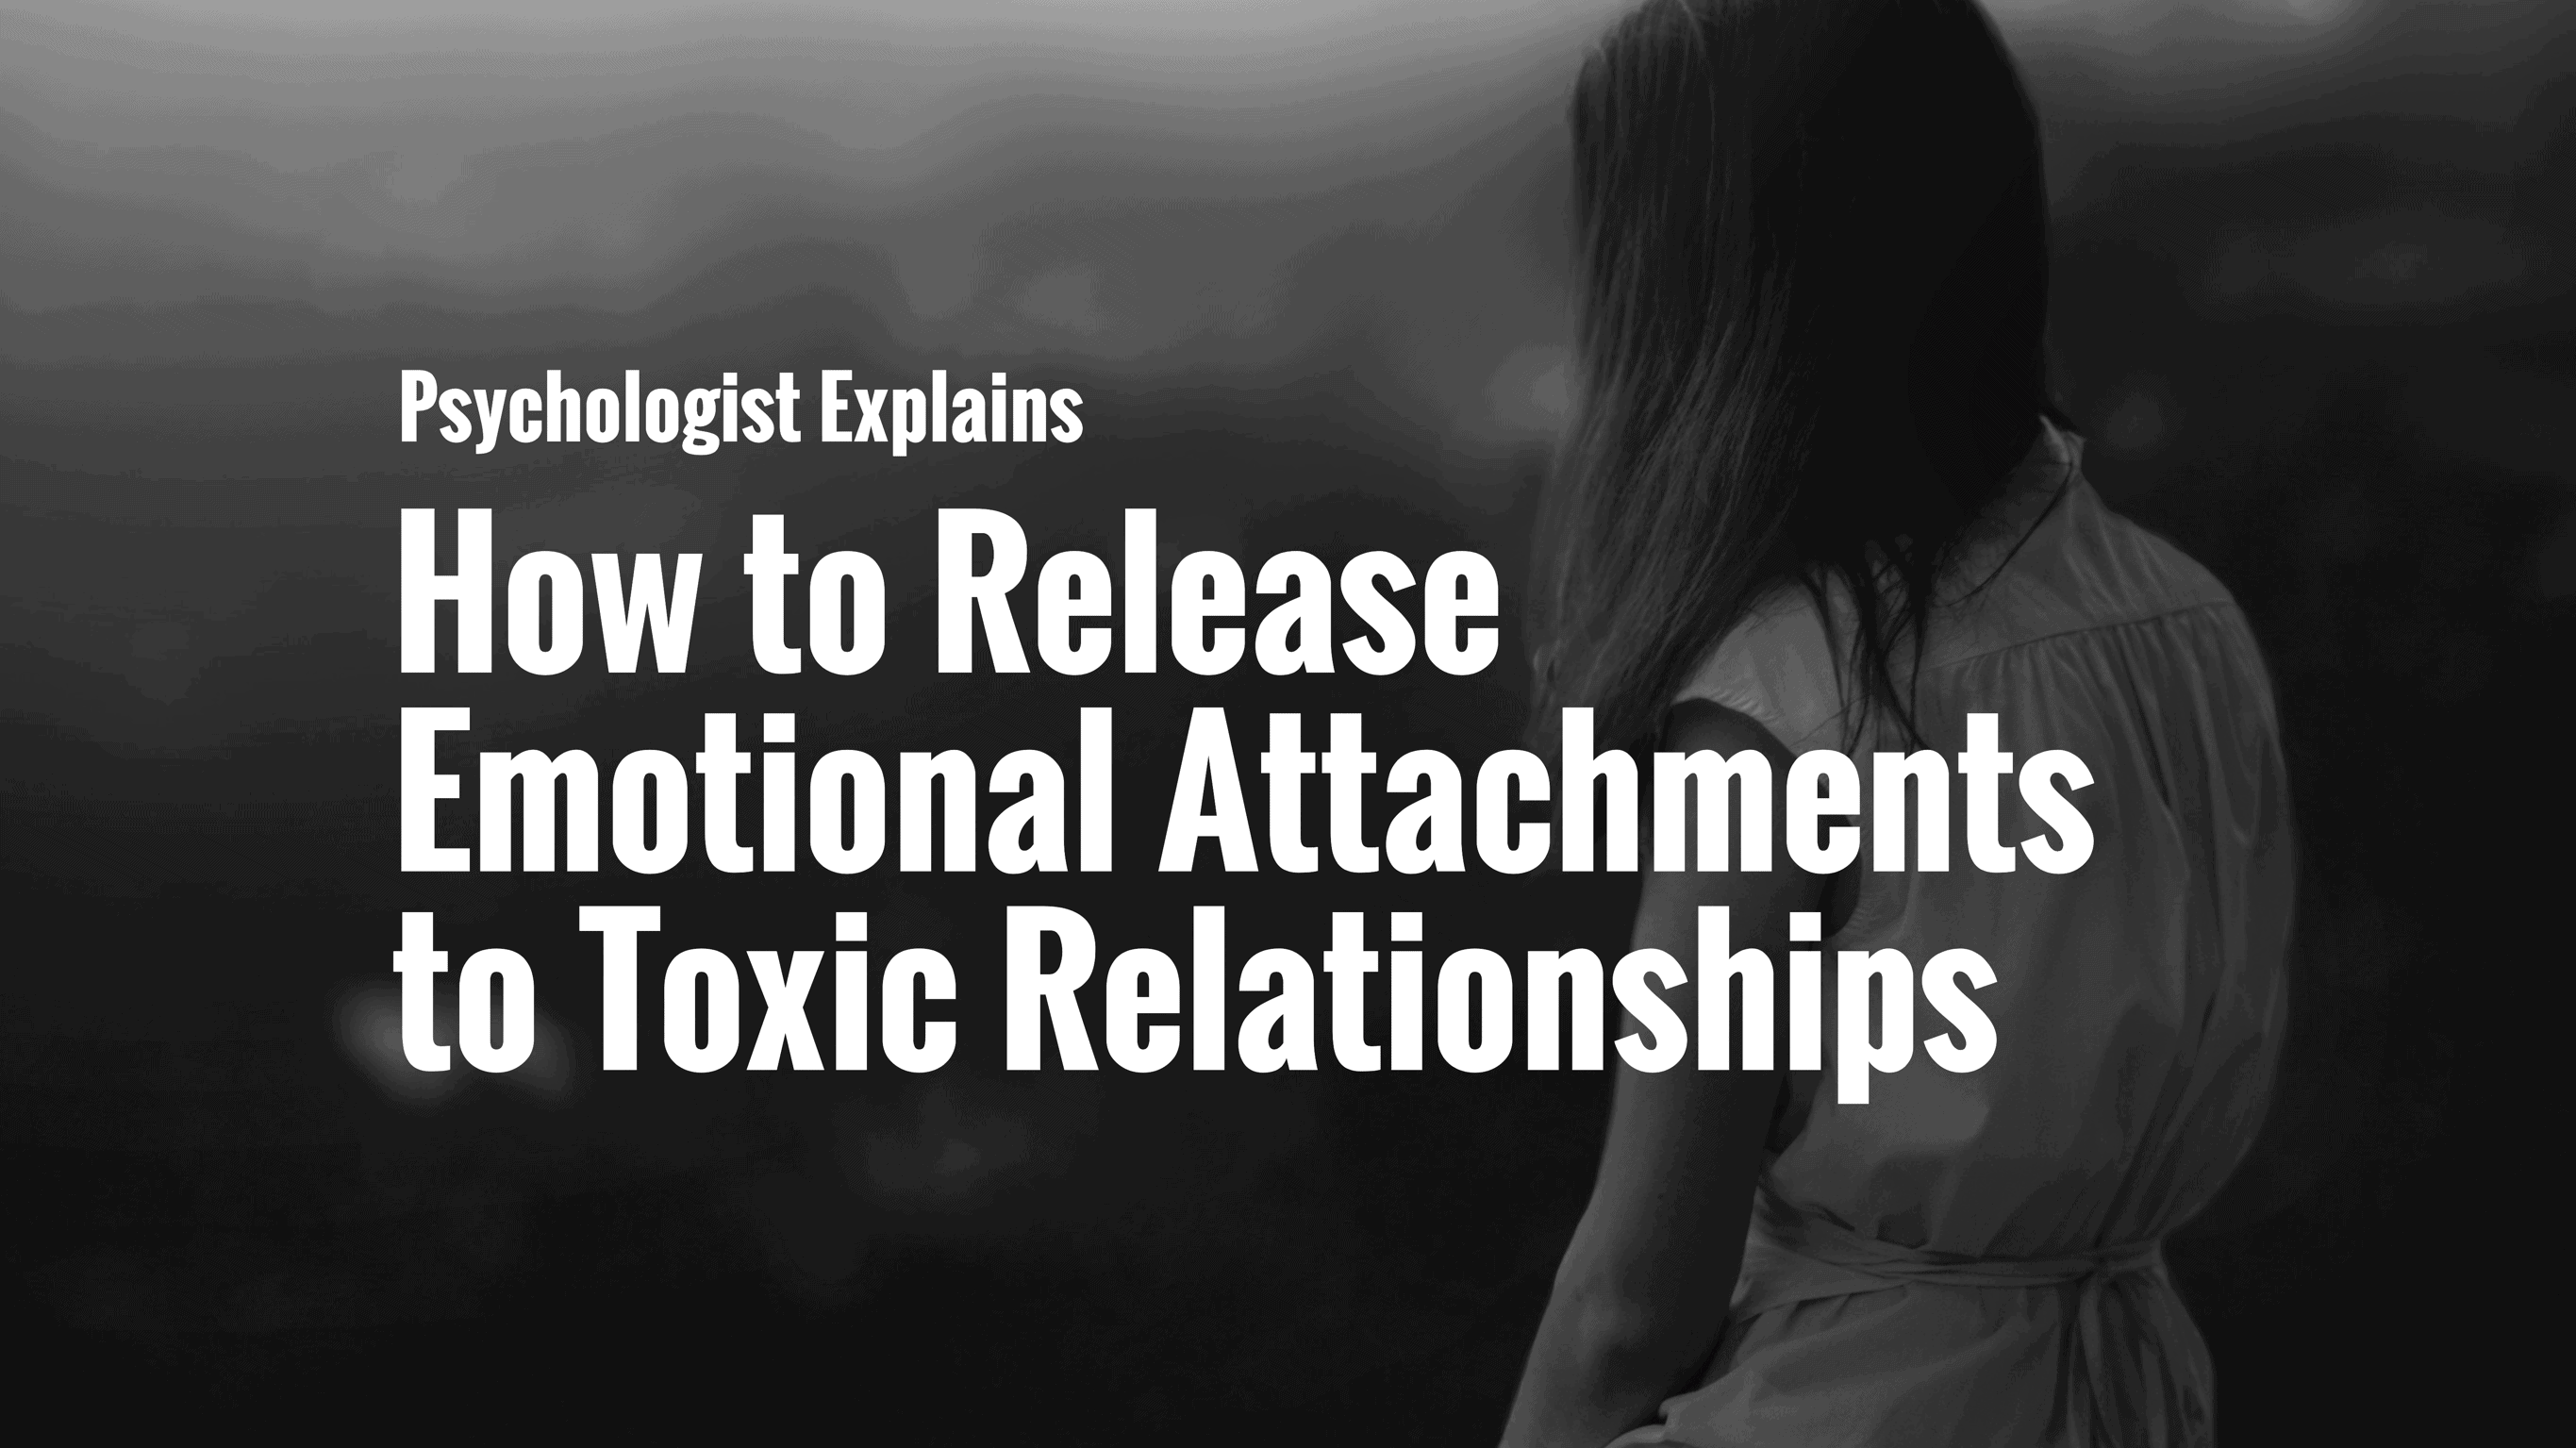 Psychologist Explains How To Release Emotional Attachments To Toxic Relationships